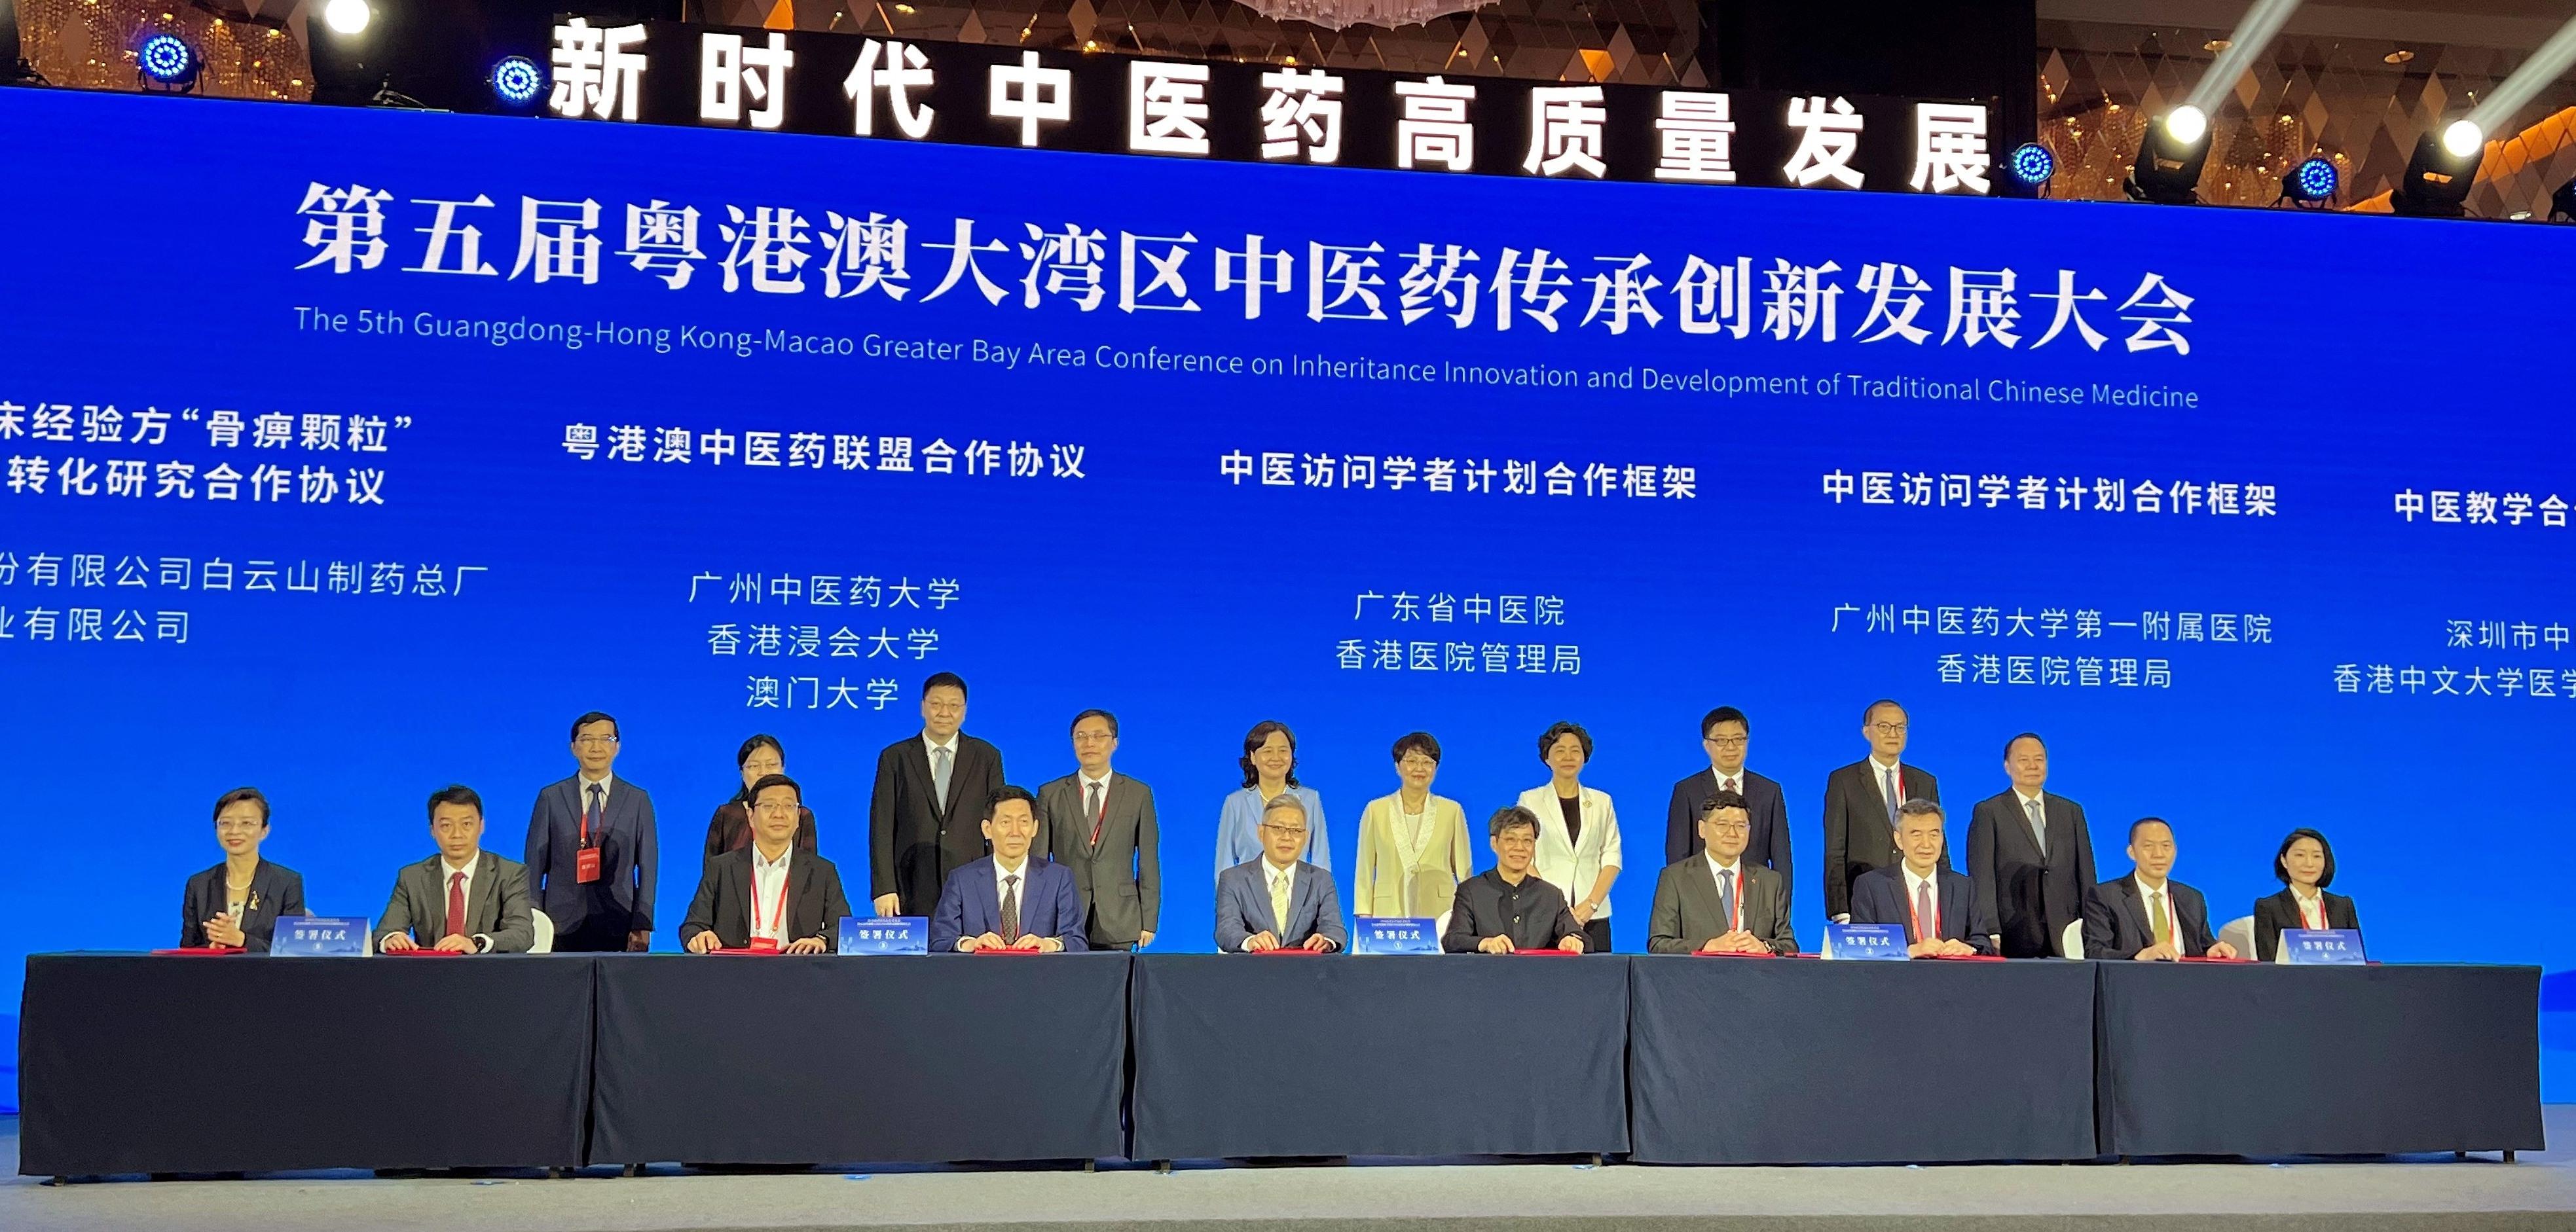 The Secretary for Health, Professor Lo Chung-mau (back row, second right), witnessed the signing of Memorandum of Understanding by the Hospital Authority (HA) with the Guangdong Provincial Hospital of Traditional Chinese Medicine and the First Affiliated Hospital of Guangzhou University of Traditional Chinese Medicine on the co-operation framework of the Chinese Medicine Visiting Scholars Programme at the 5th Guangdong-Hong Kong-Macao Greater Bay Area Conference on Inheritance, Innovation and Development of Traditional Chinese Medicine held in Foshan today (September 14). Also at the signing ceremony are the Party Group Member of the National Health Commission cum Party Secretary and Commissioner of the National Administration of Traditional Chinese Medicine, Professor Yu Yanhong (back row, fifth left), and the Chief Executive of the HA, Dr Tony Ko (front row, fourth right).